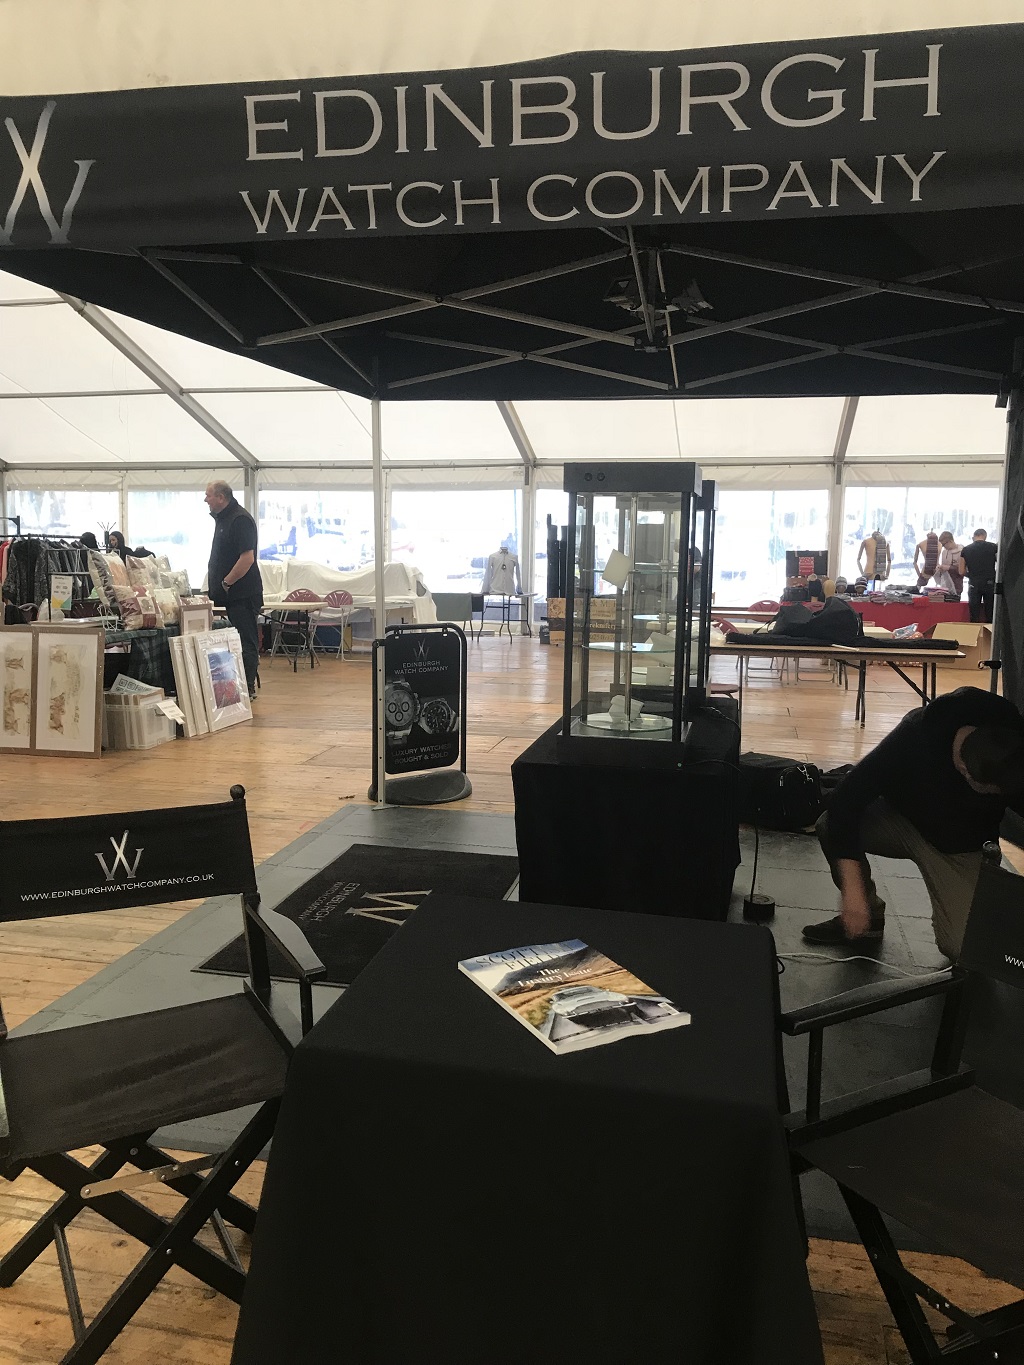 Our friends at the Edinburgh Watch Company are attending Scotland's Boat Show